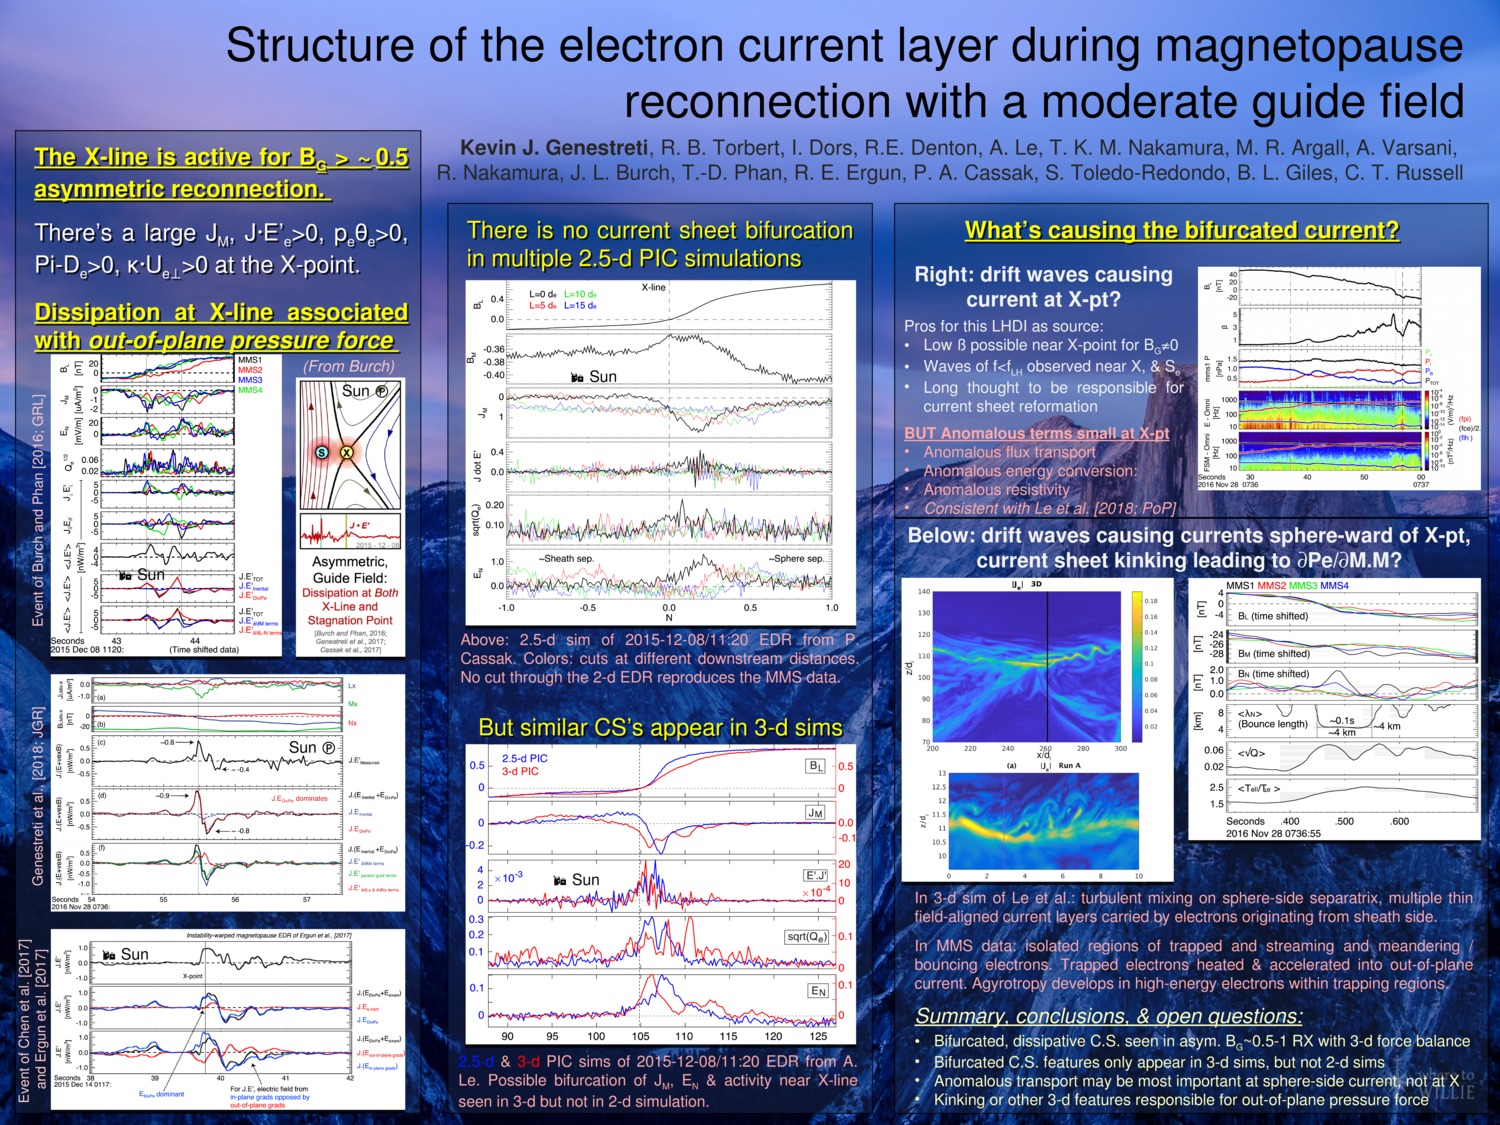 Structure Of The Electron Current Layer During Magnetopause Reconnection With A Moderate Guide Field by kevingenestreti